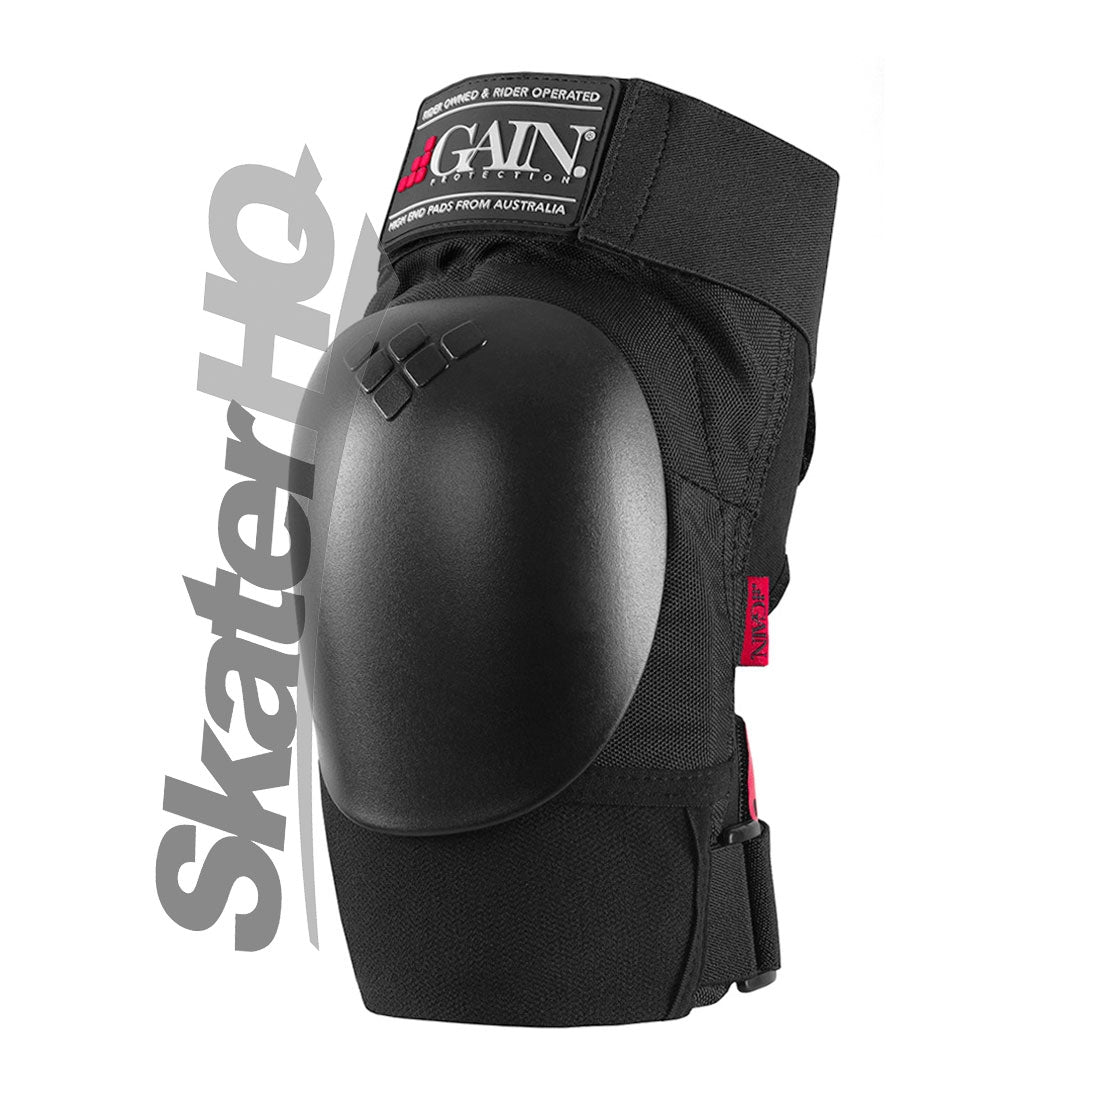 GAIN Shield Knee Pads - Black - S Protective Gear